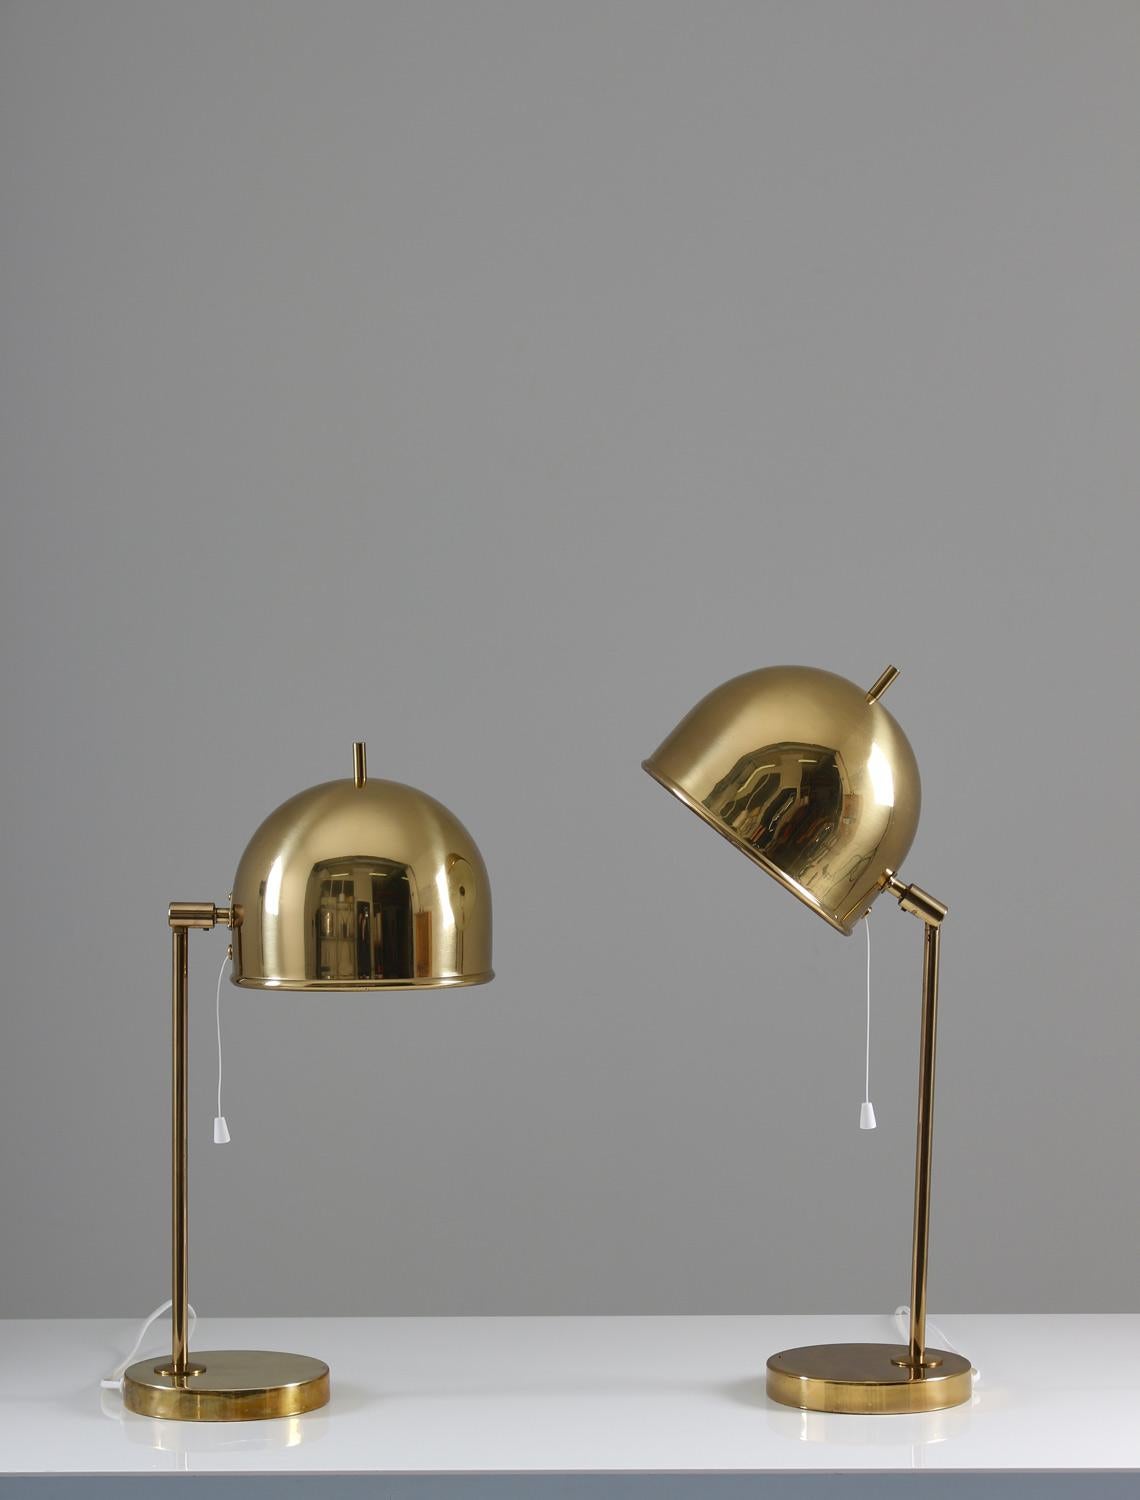 Midcentury table lamps in brass model B-075 by Eje Ahlgren for Bergboms, Sweden
stunning high quality lamps made of solid brass.
Condition: Very good condition with light scratches due to age and use.